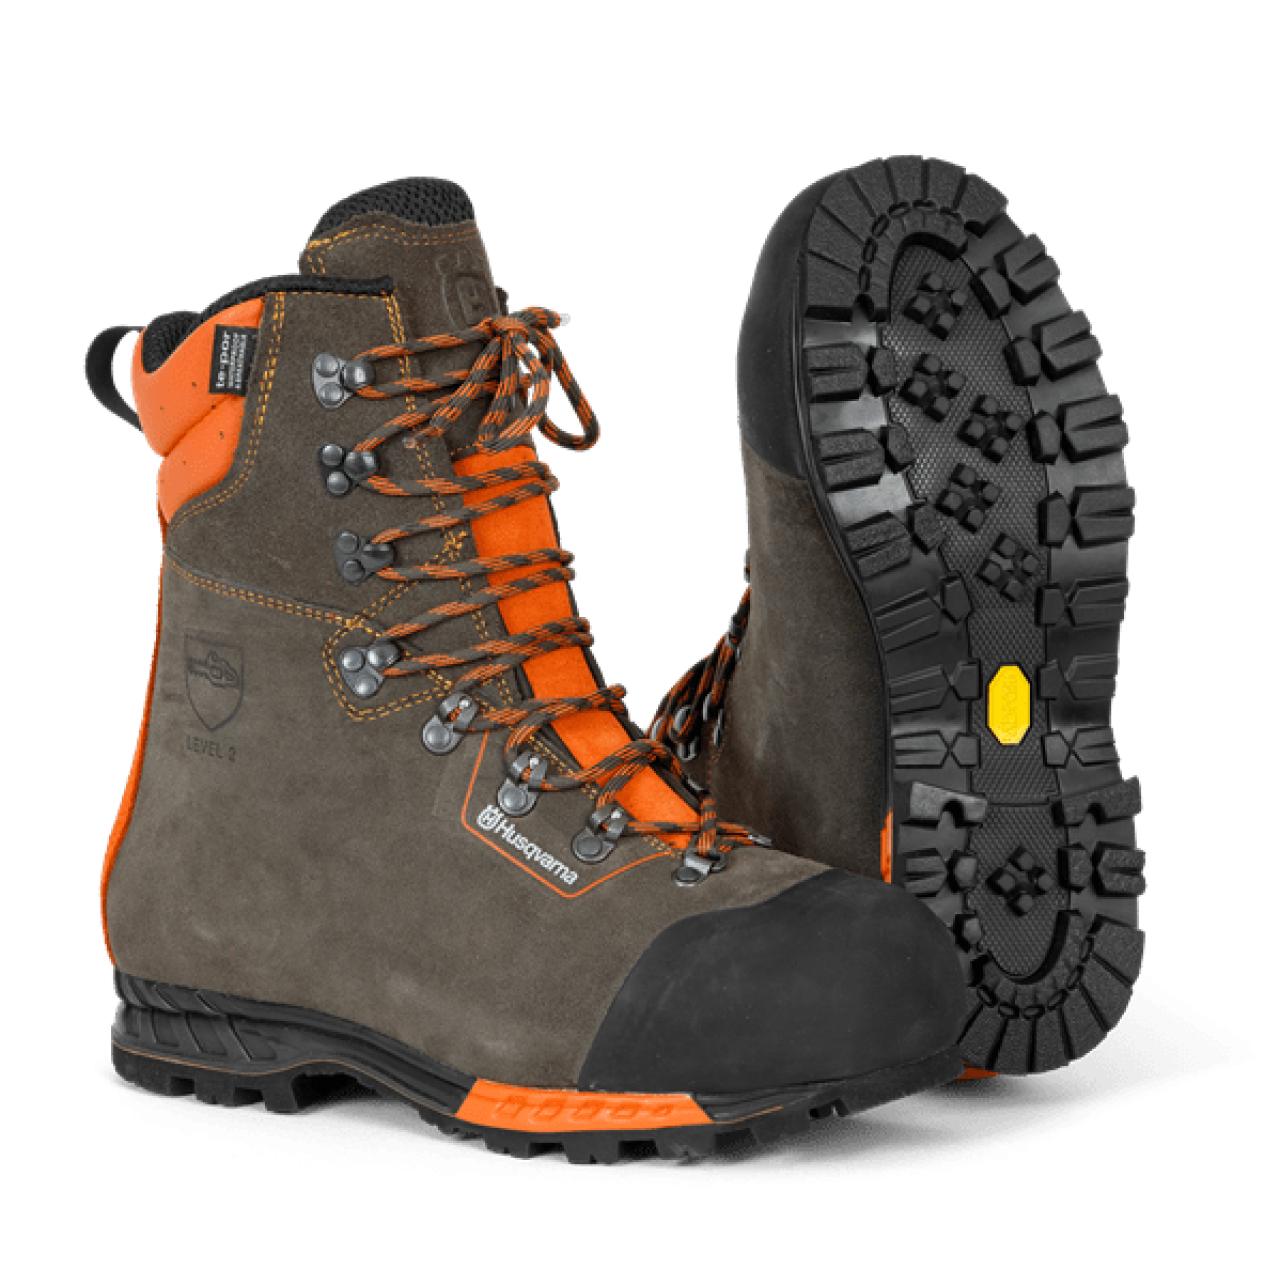 Stiefel Functional 24 Level 2